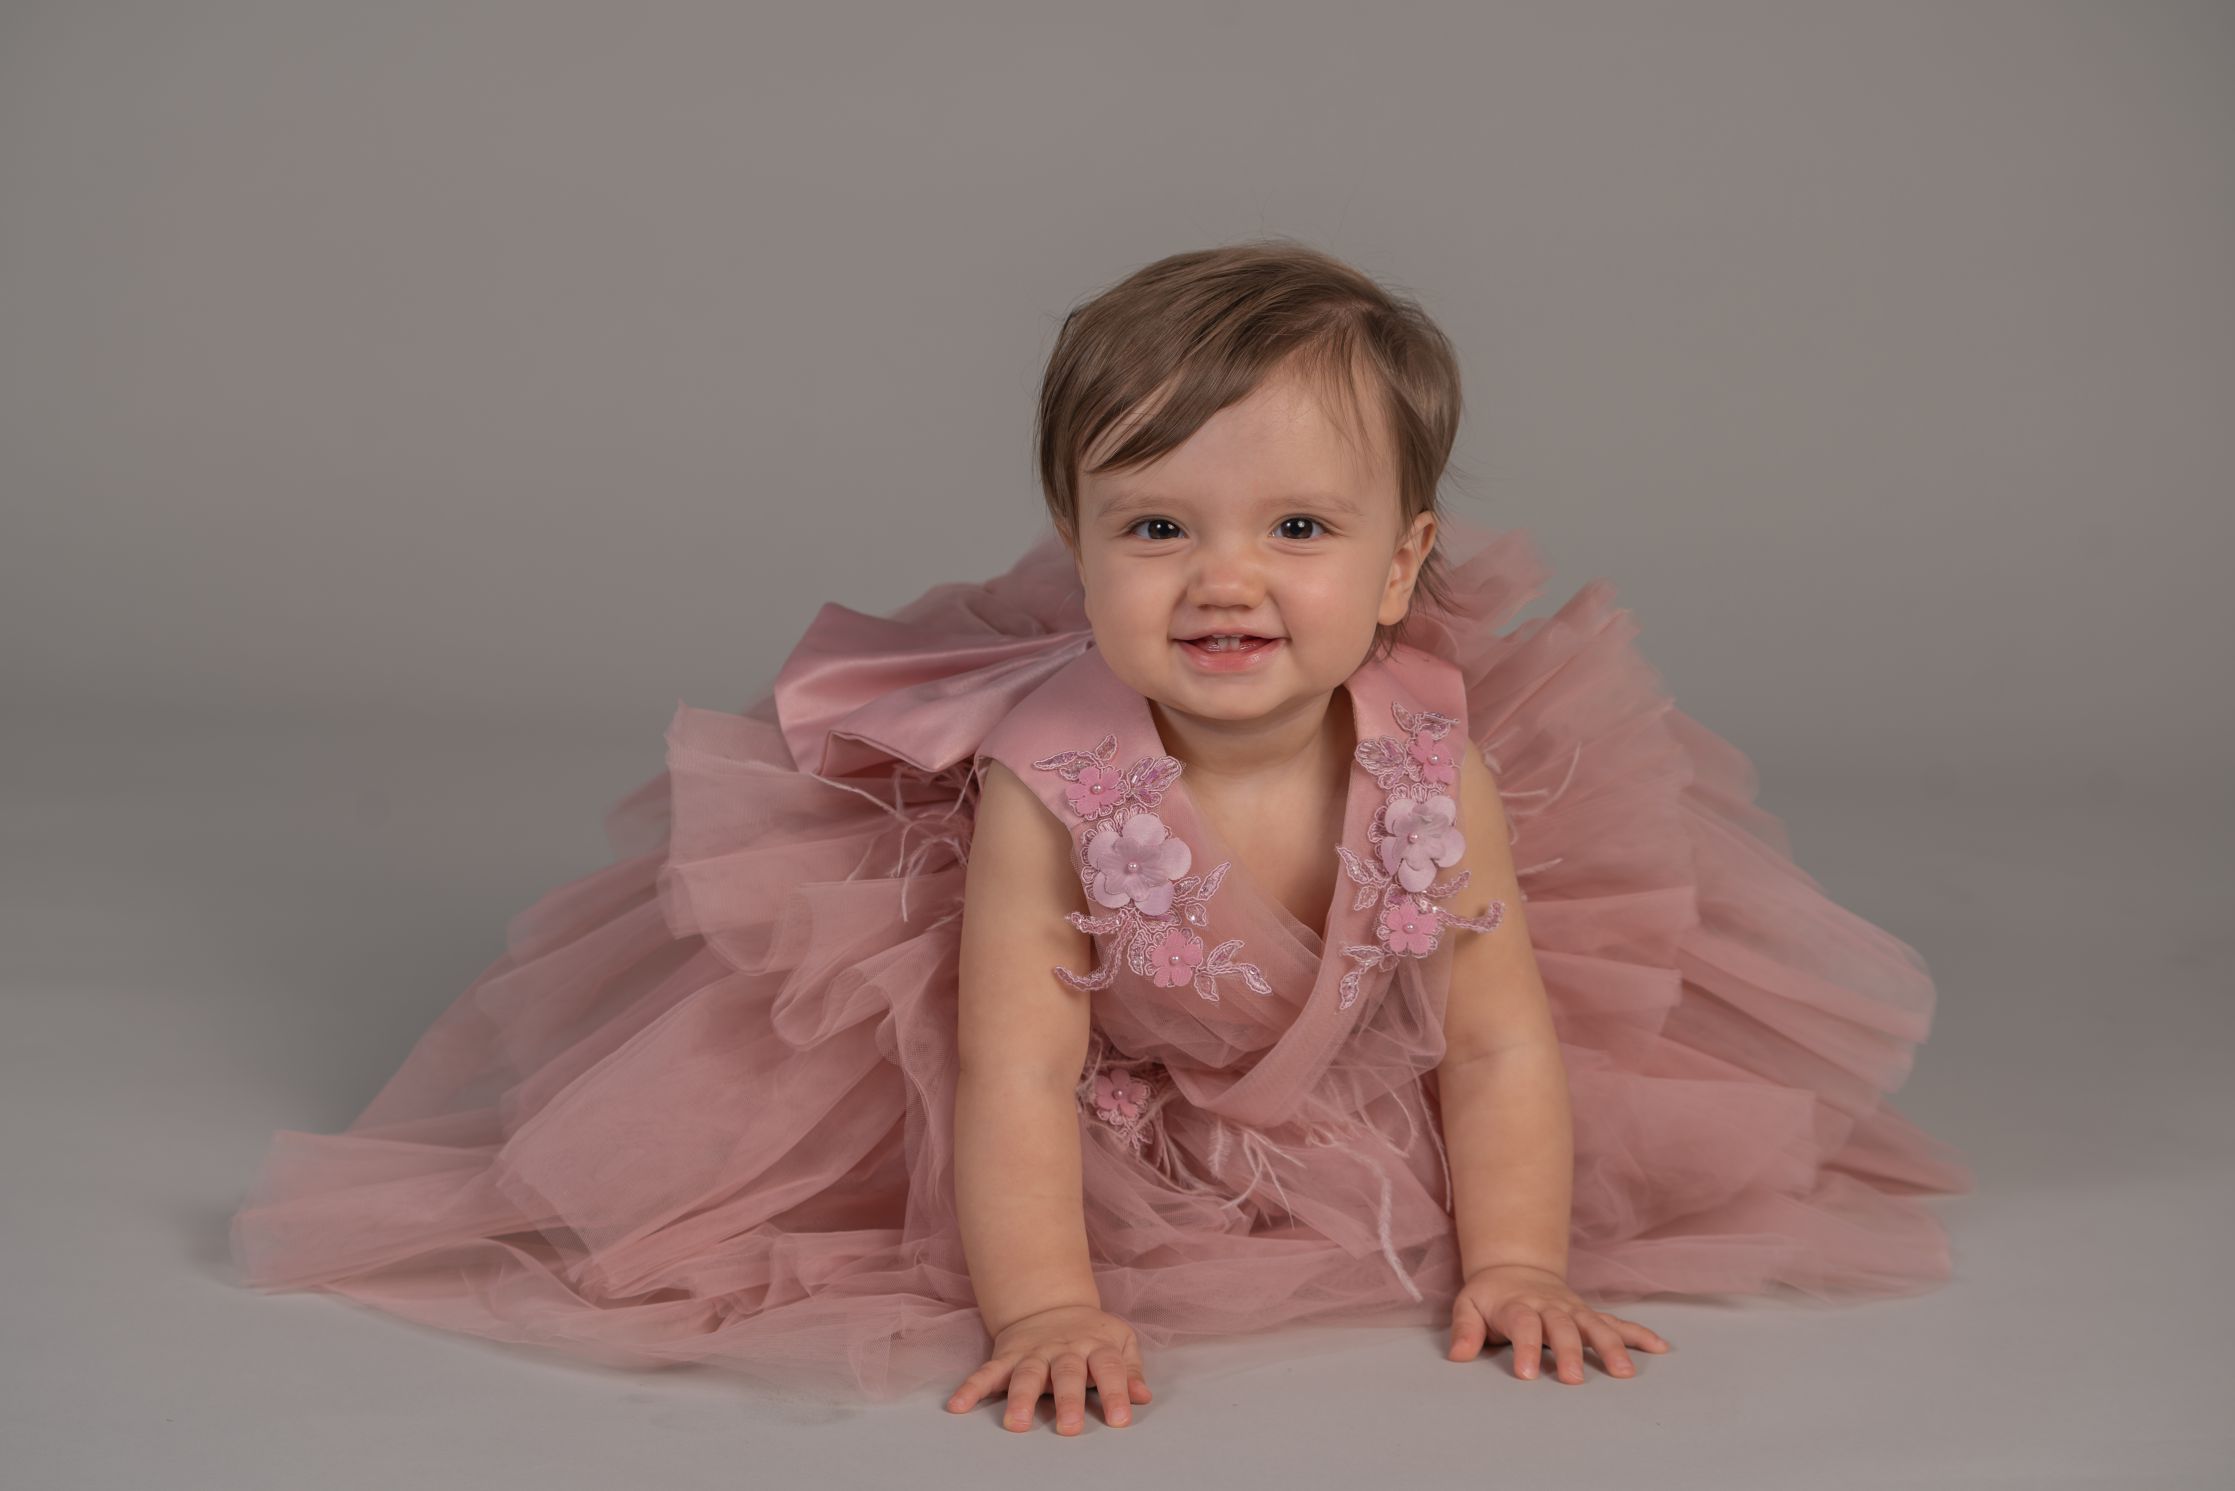 Baby Girl Photoshoot With Pink Dress